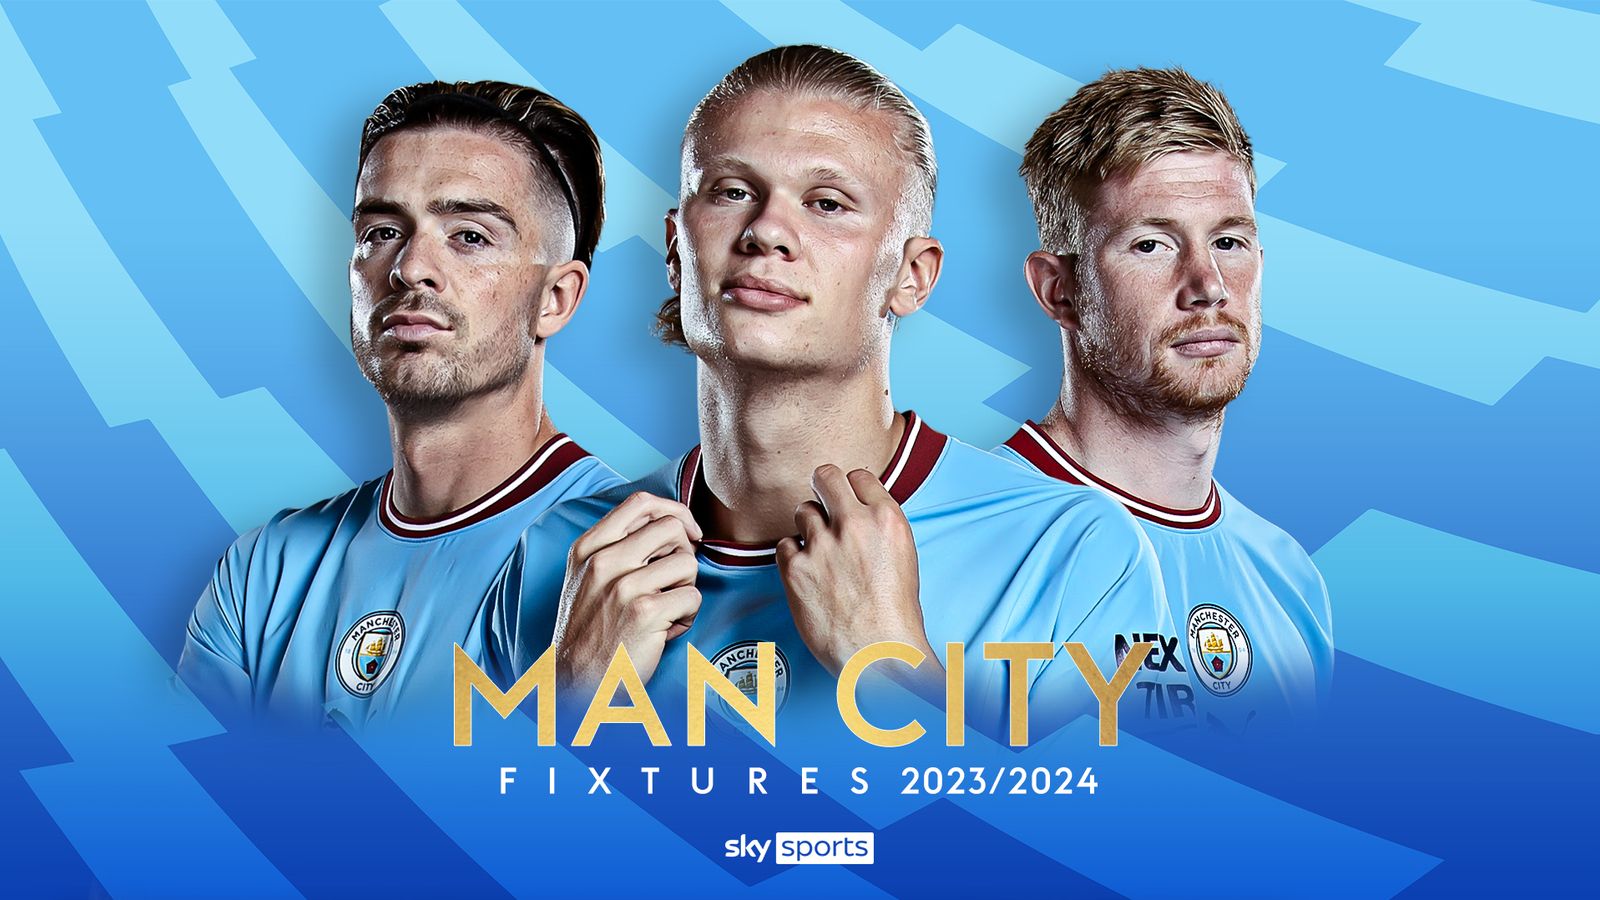 DOWNLOAD: Sky Blues 2023/24 fixture list wallpaper - News - Coventry City